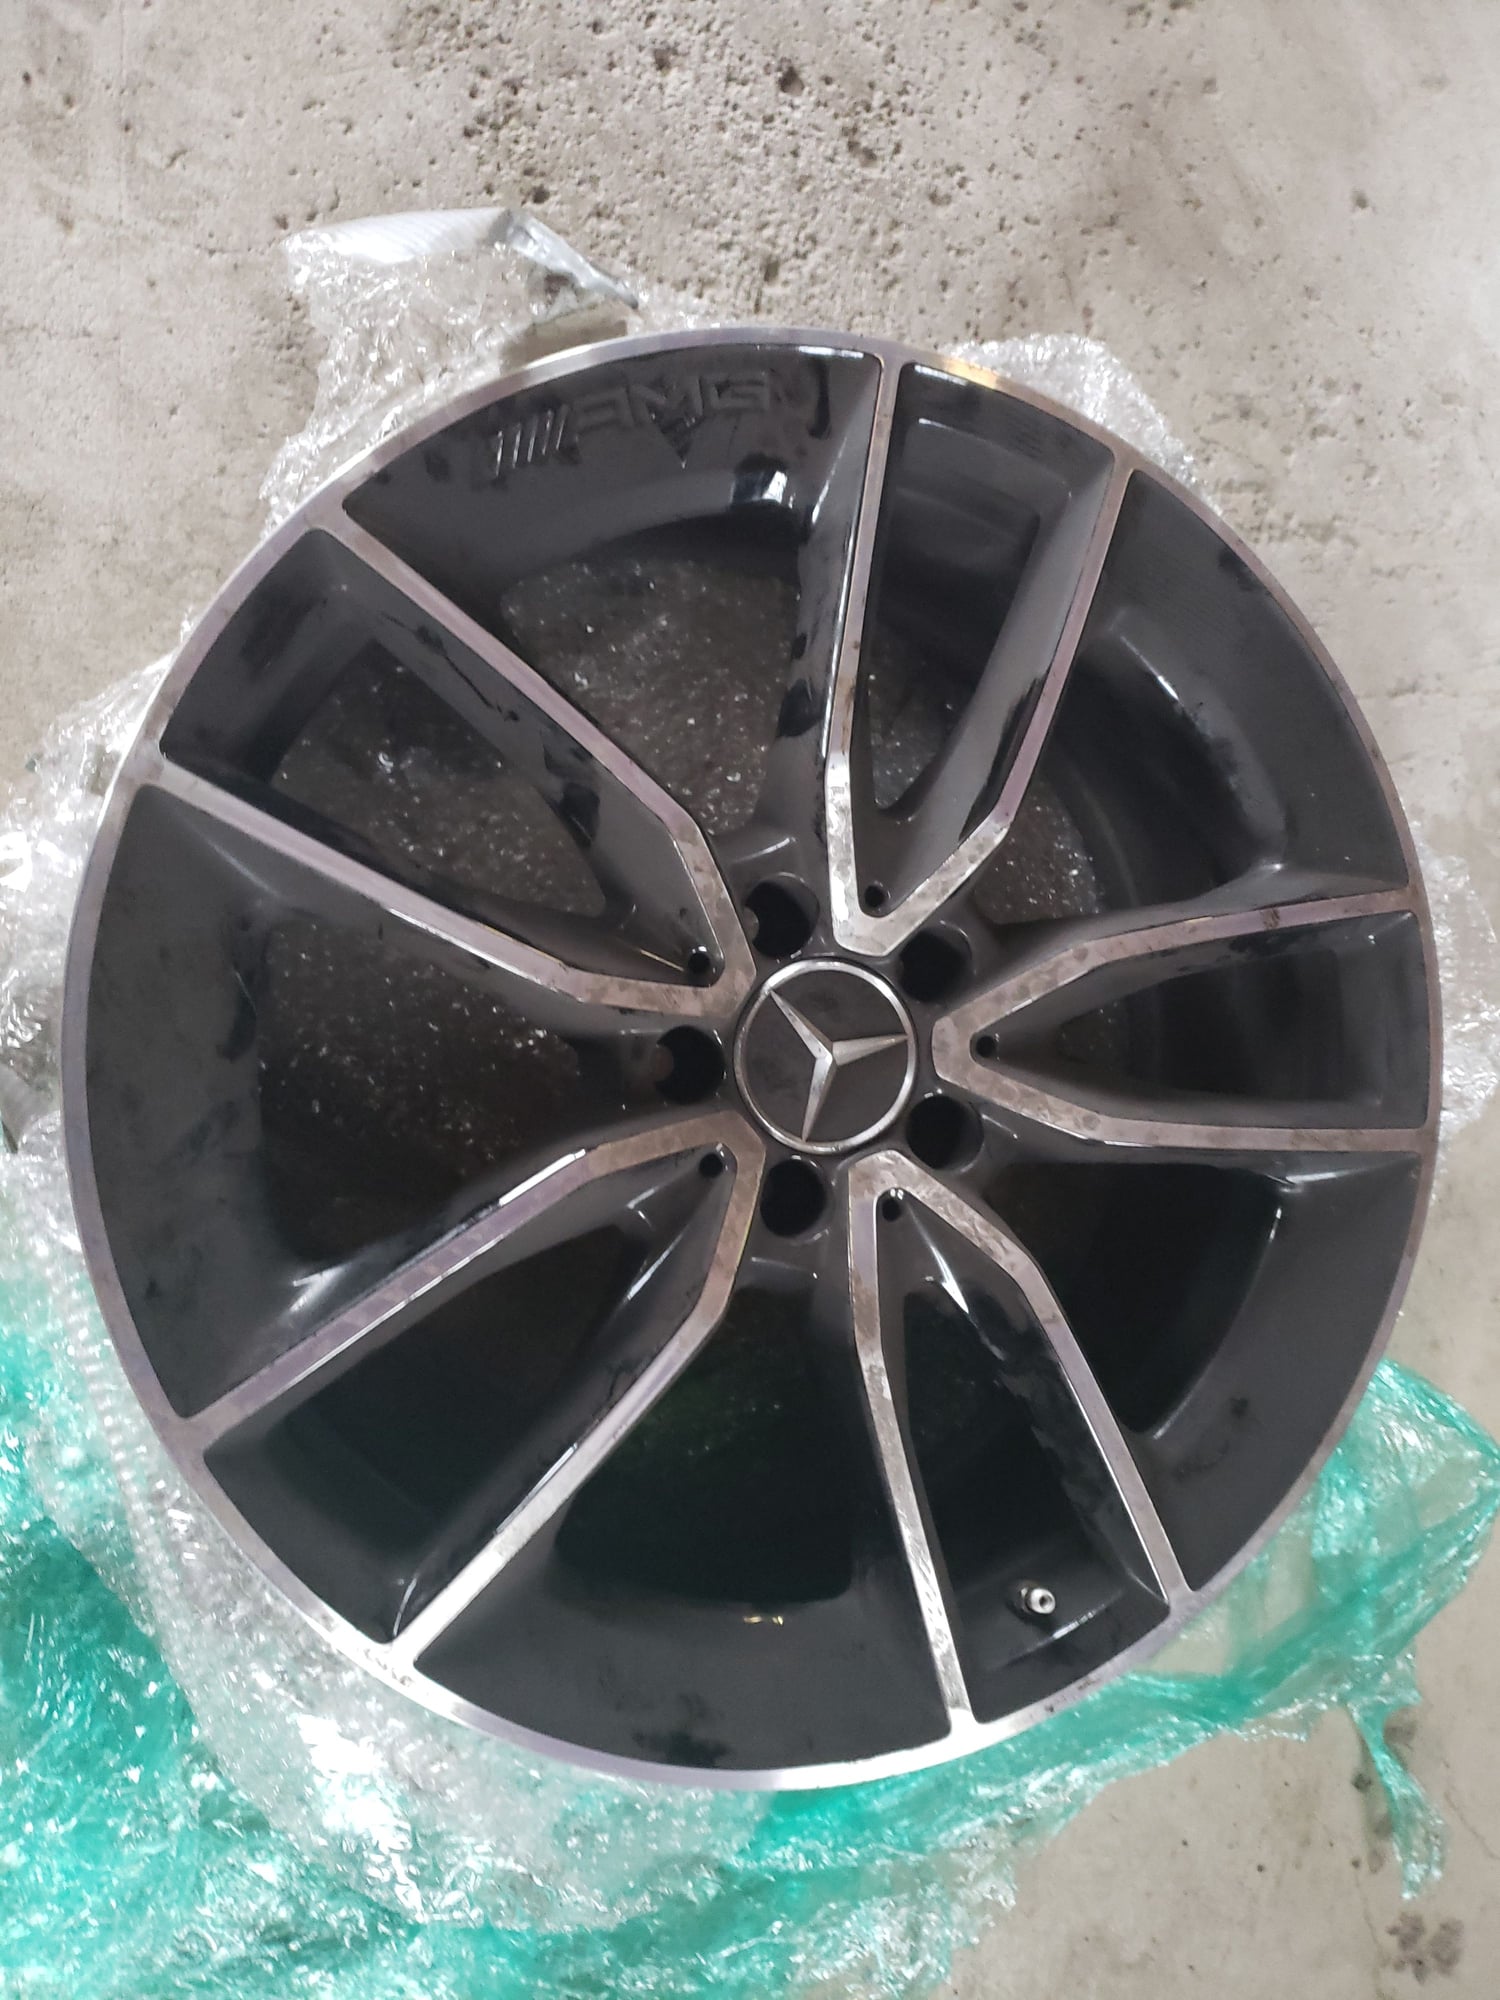 Wheels and Tires/Axles - Selling 19 inch C43 Rims - Used - 2019 to 2021 Mercedes-Benz C43 AMG - Clarence Center, NY 14032, United States